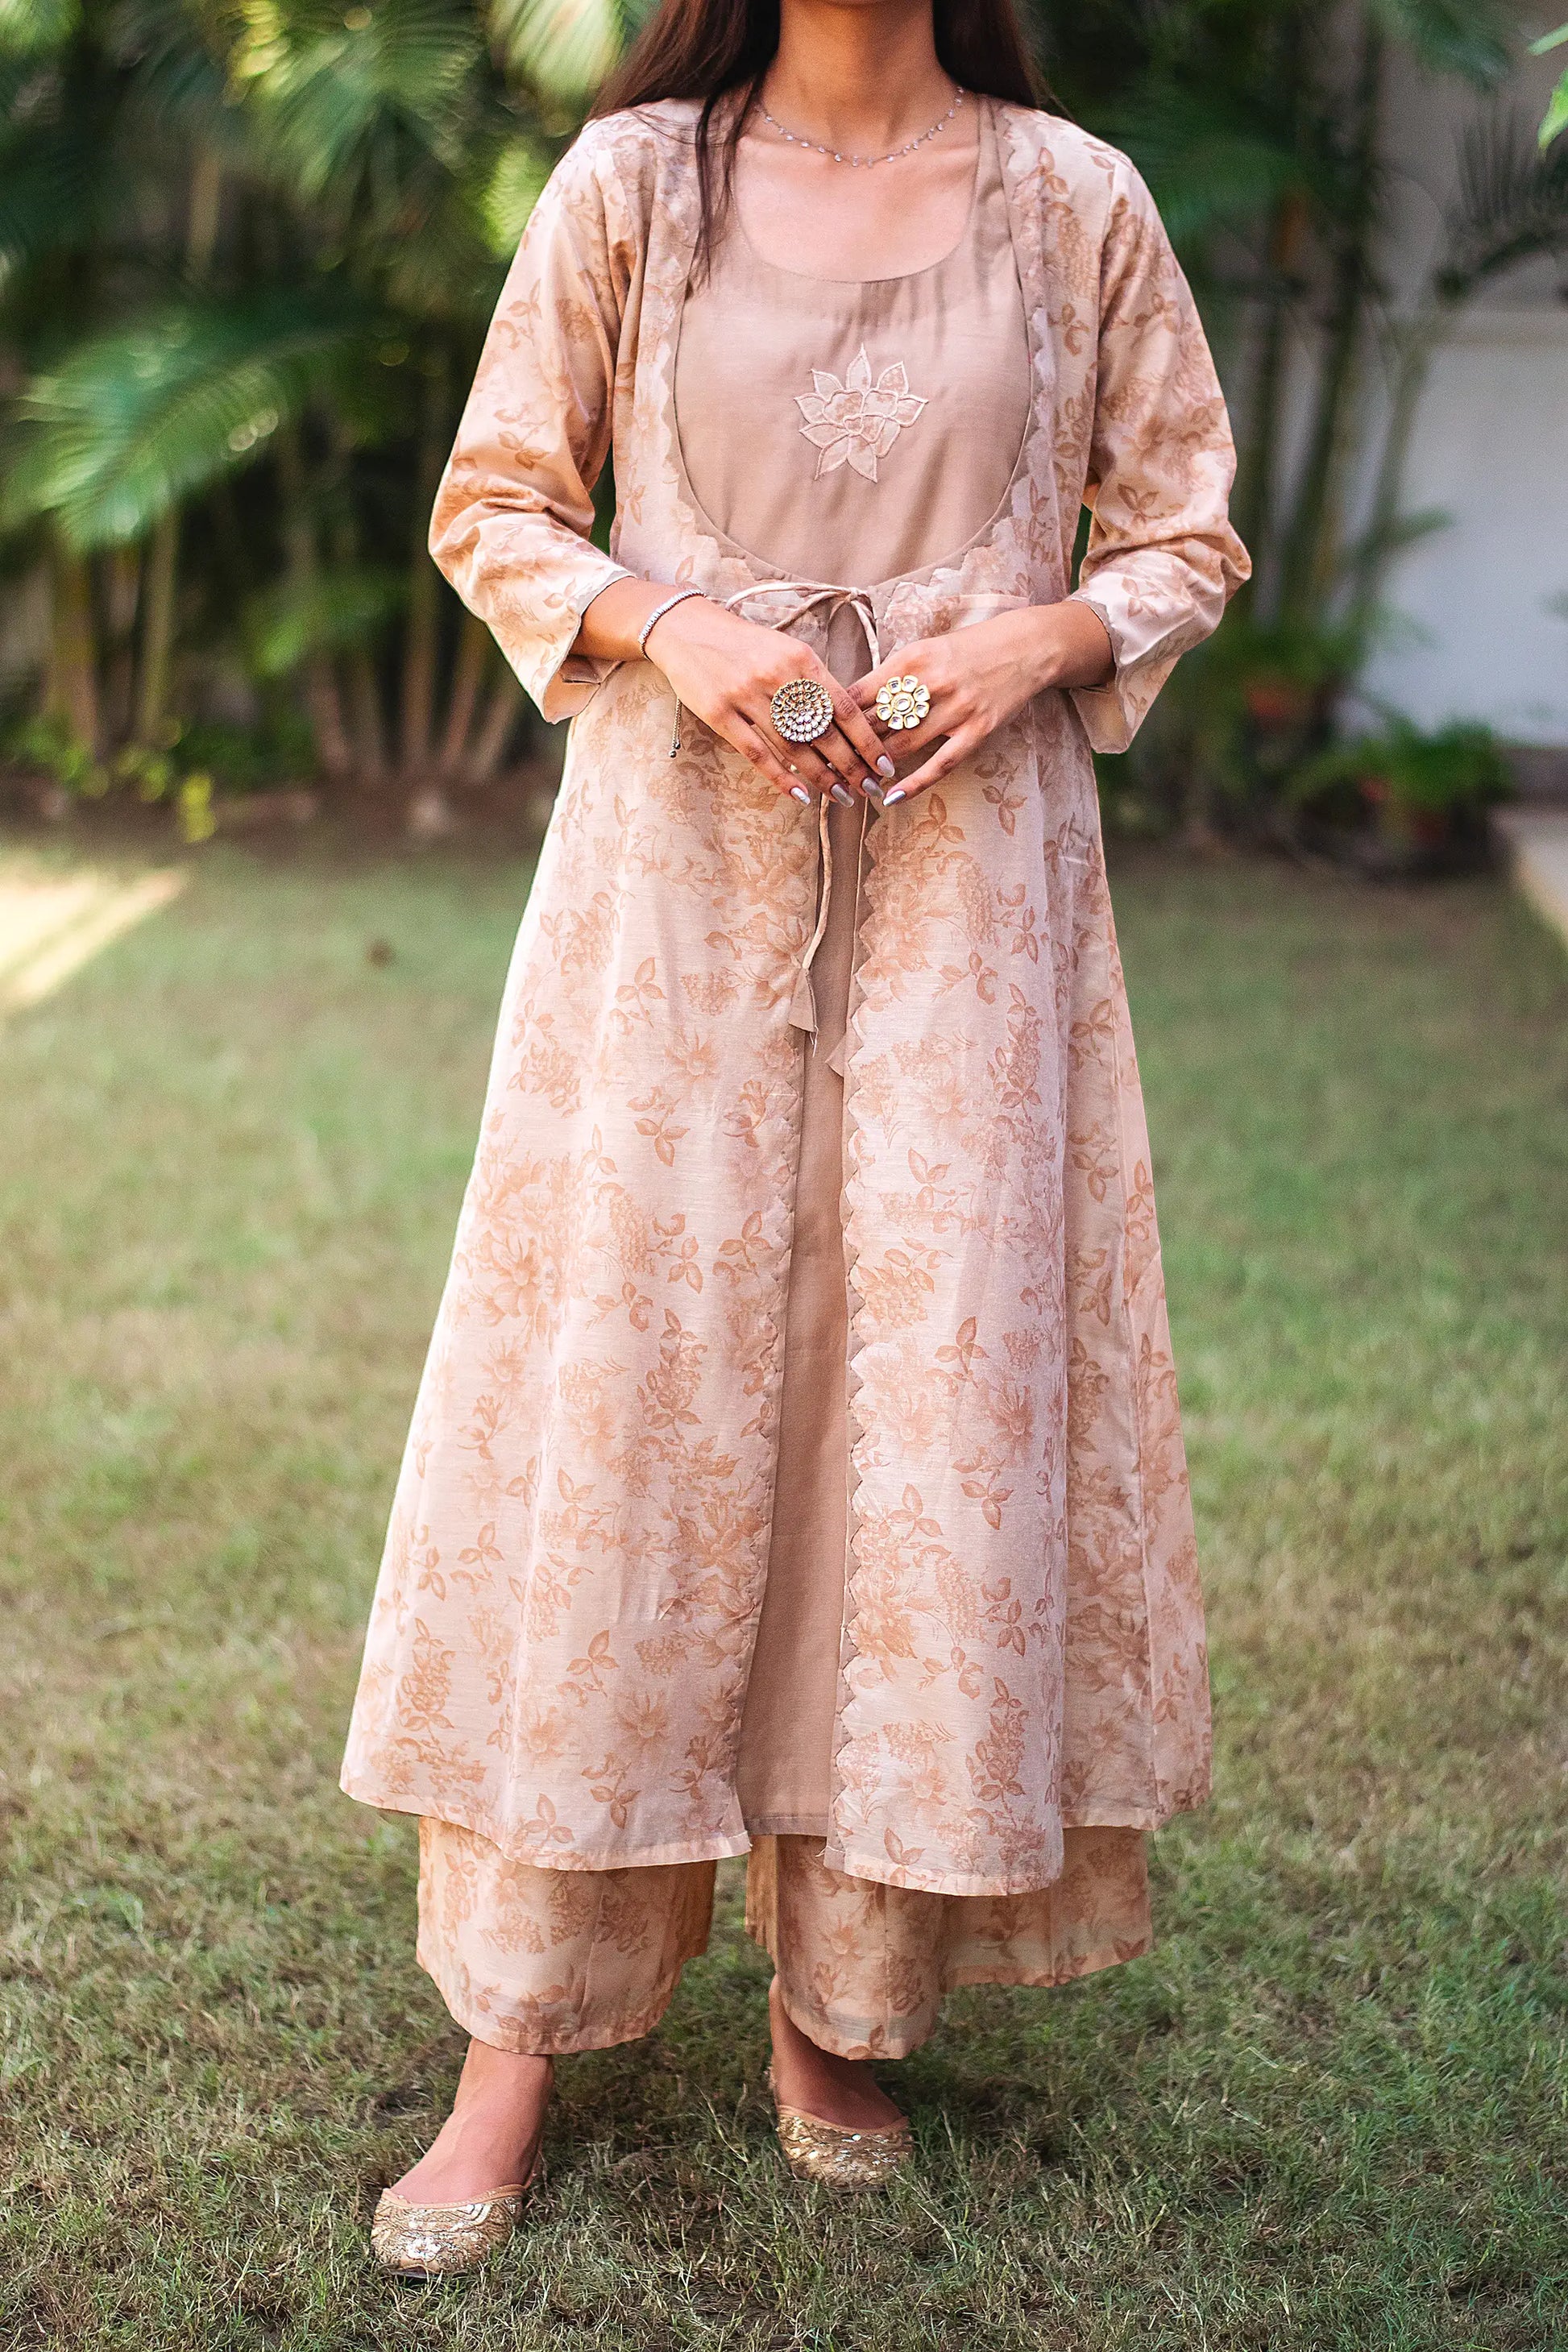 Close-up of the beige floral print chanderi fabric and intricate kikri work on the angrakha kurta, as worn by the model